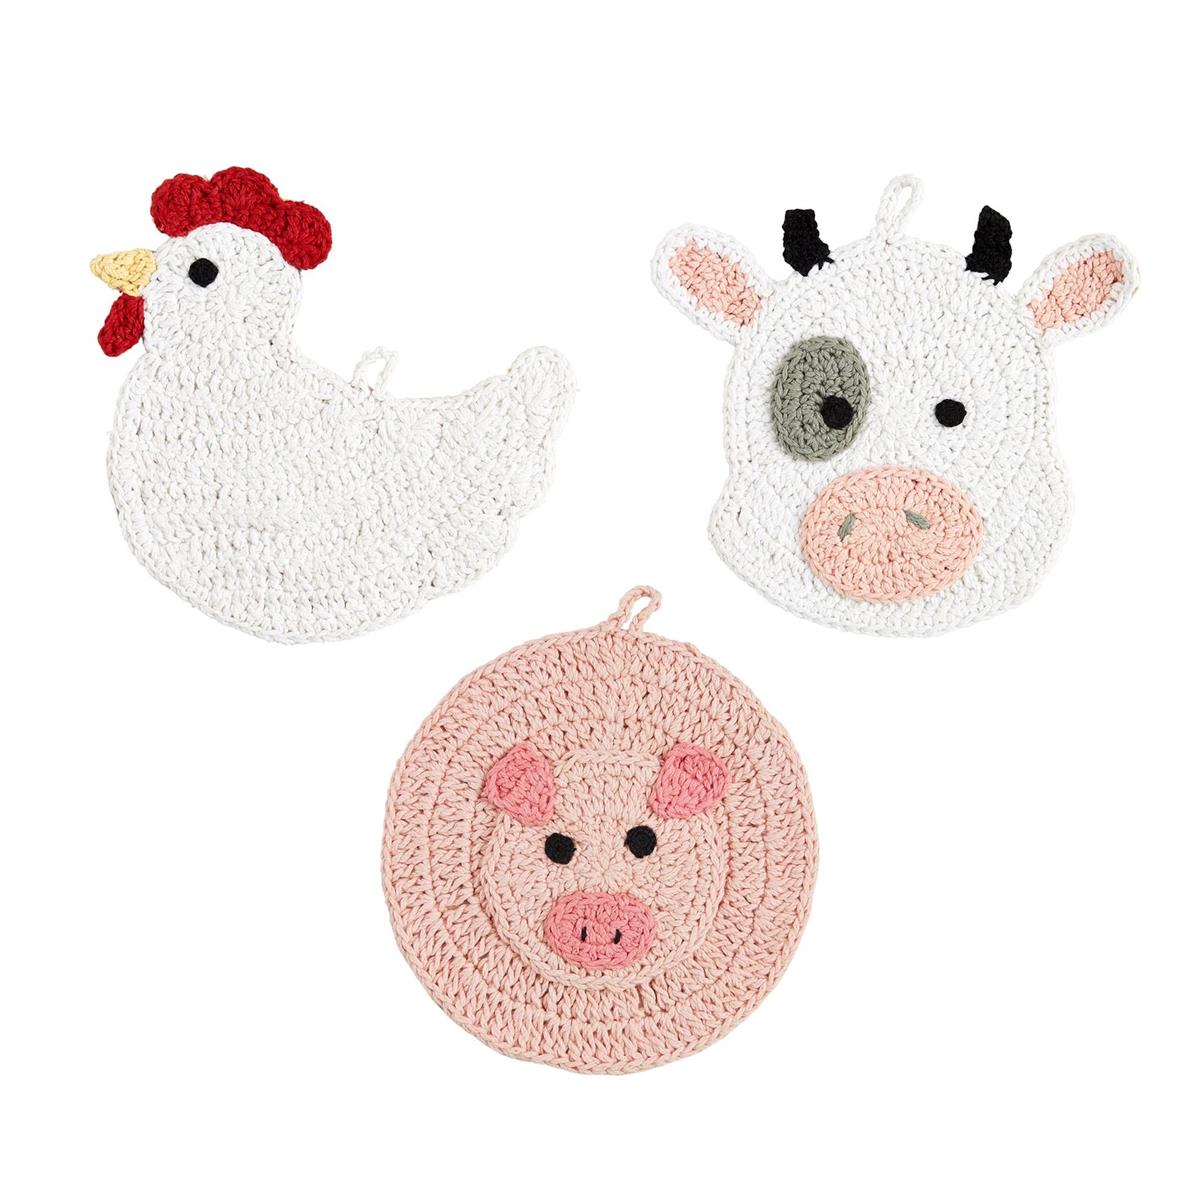 rooster, cow, and pig crocheted trivets on a white background.